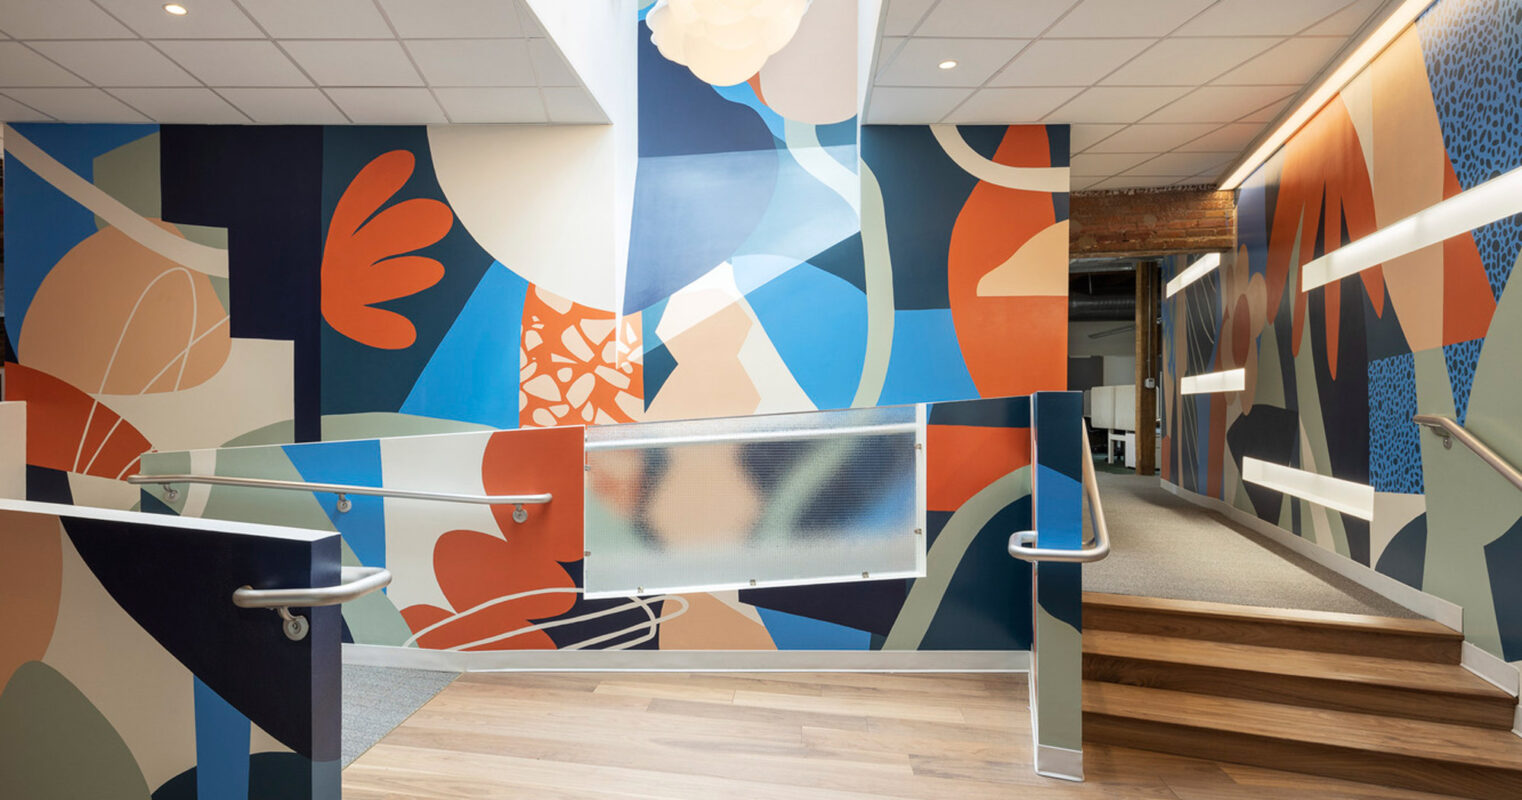 Vibrant mural adorning the walls of a staircase landing, featuring abstract human figures in orange, blue, and gray tones. Warm wooden flooring enhances the modern feel alongside the sleek metal handrails.